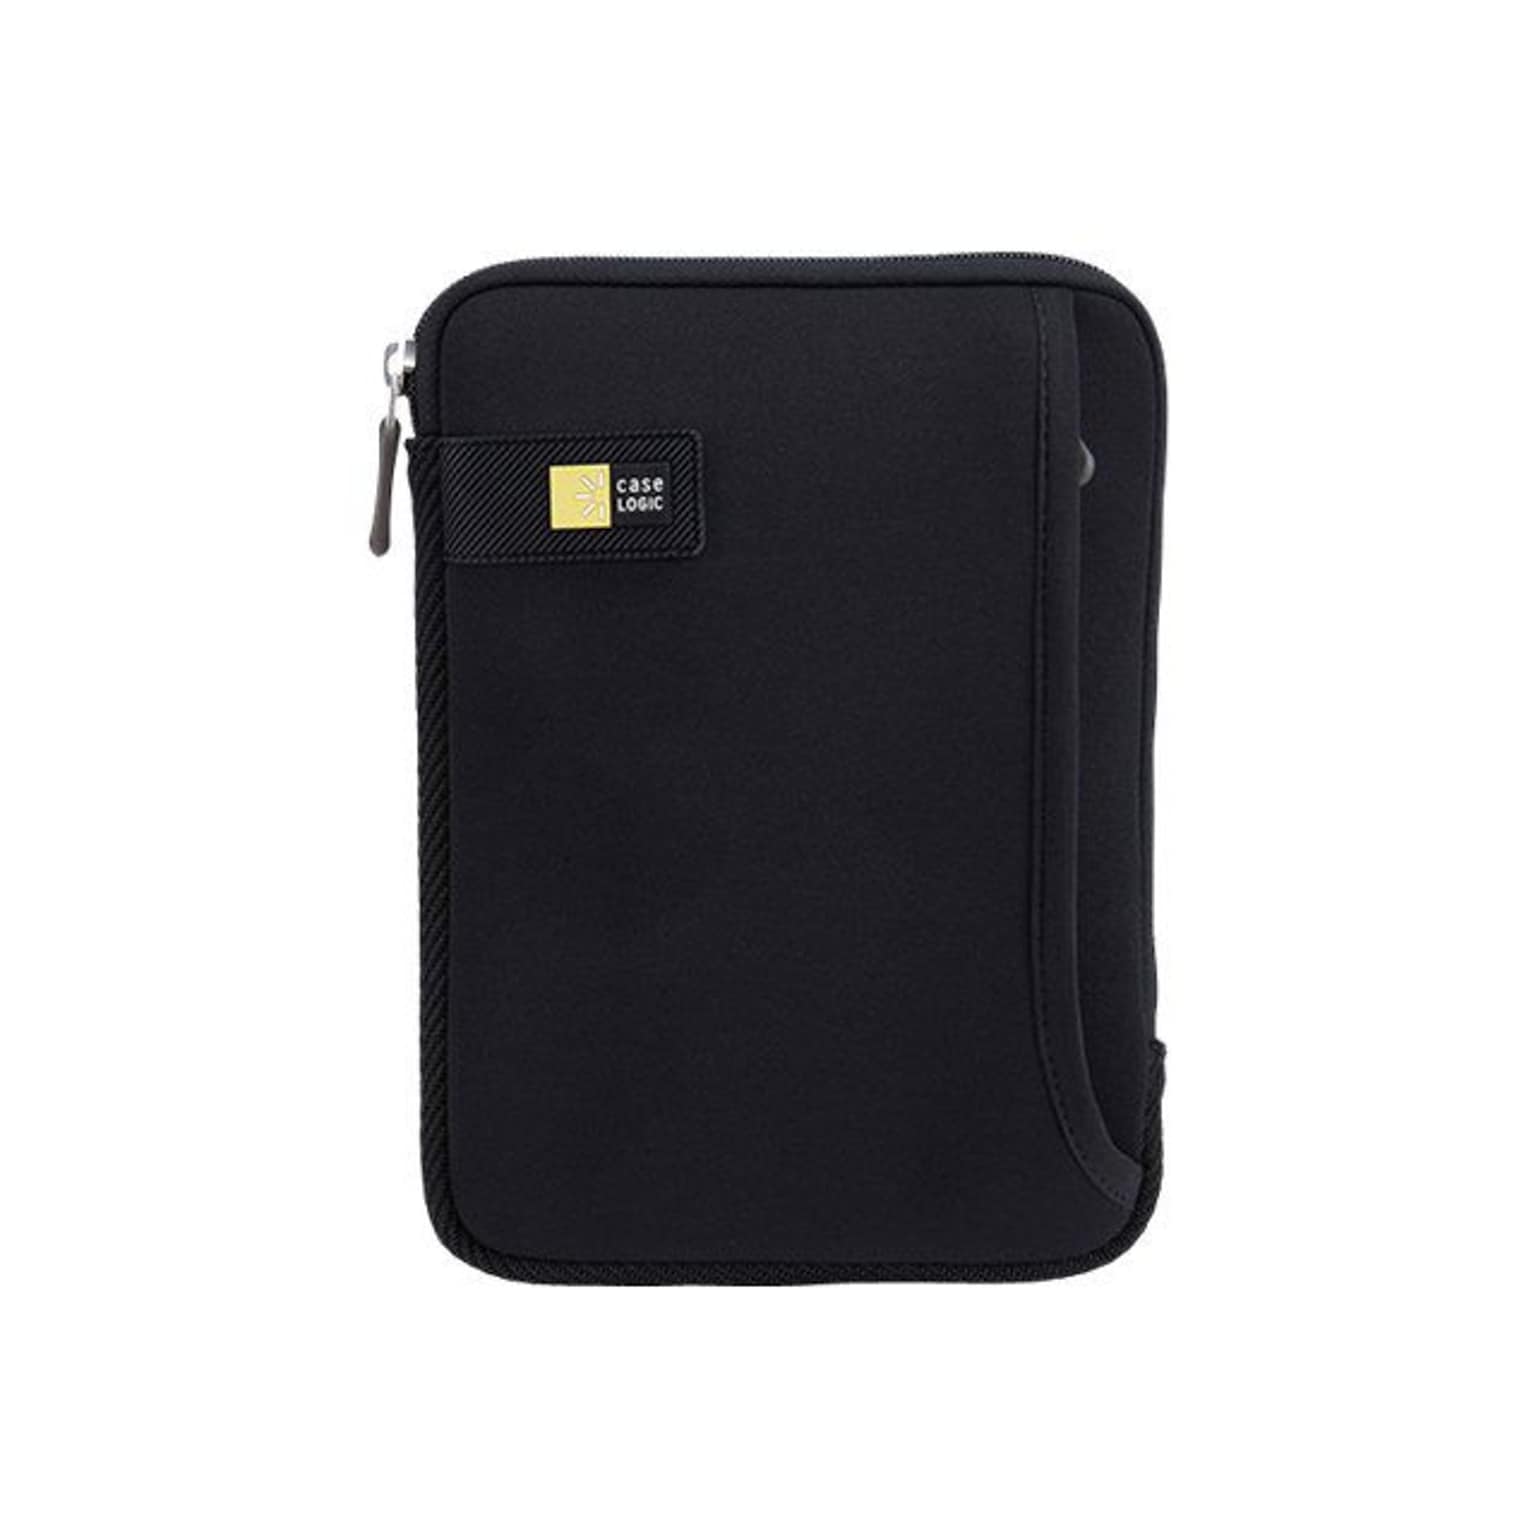 Case Logic® Carrying Case For 7 iPad Mini Tablet With Pocket; Black